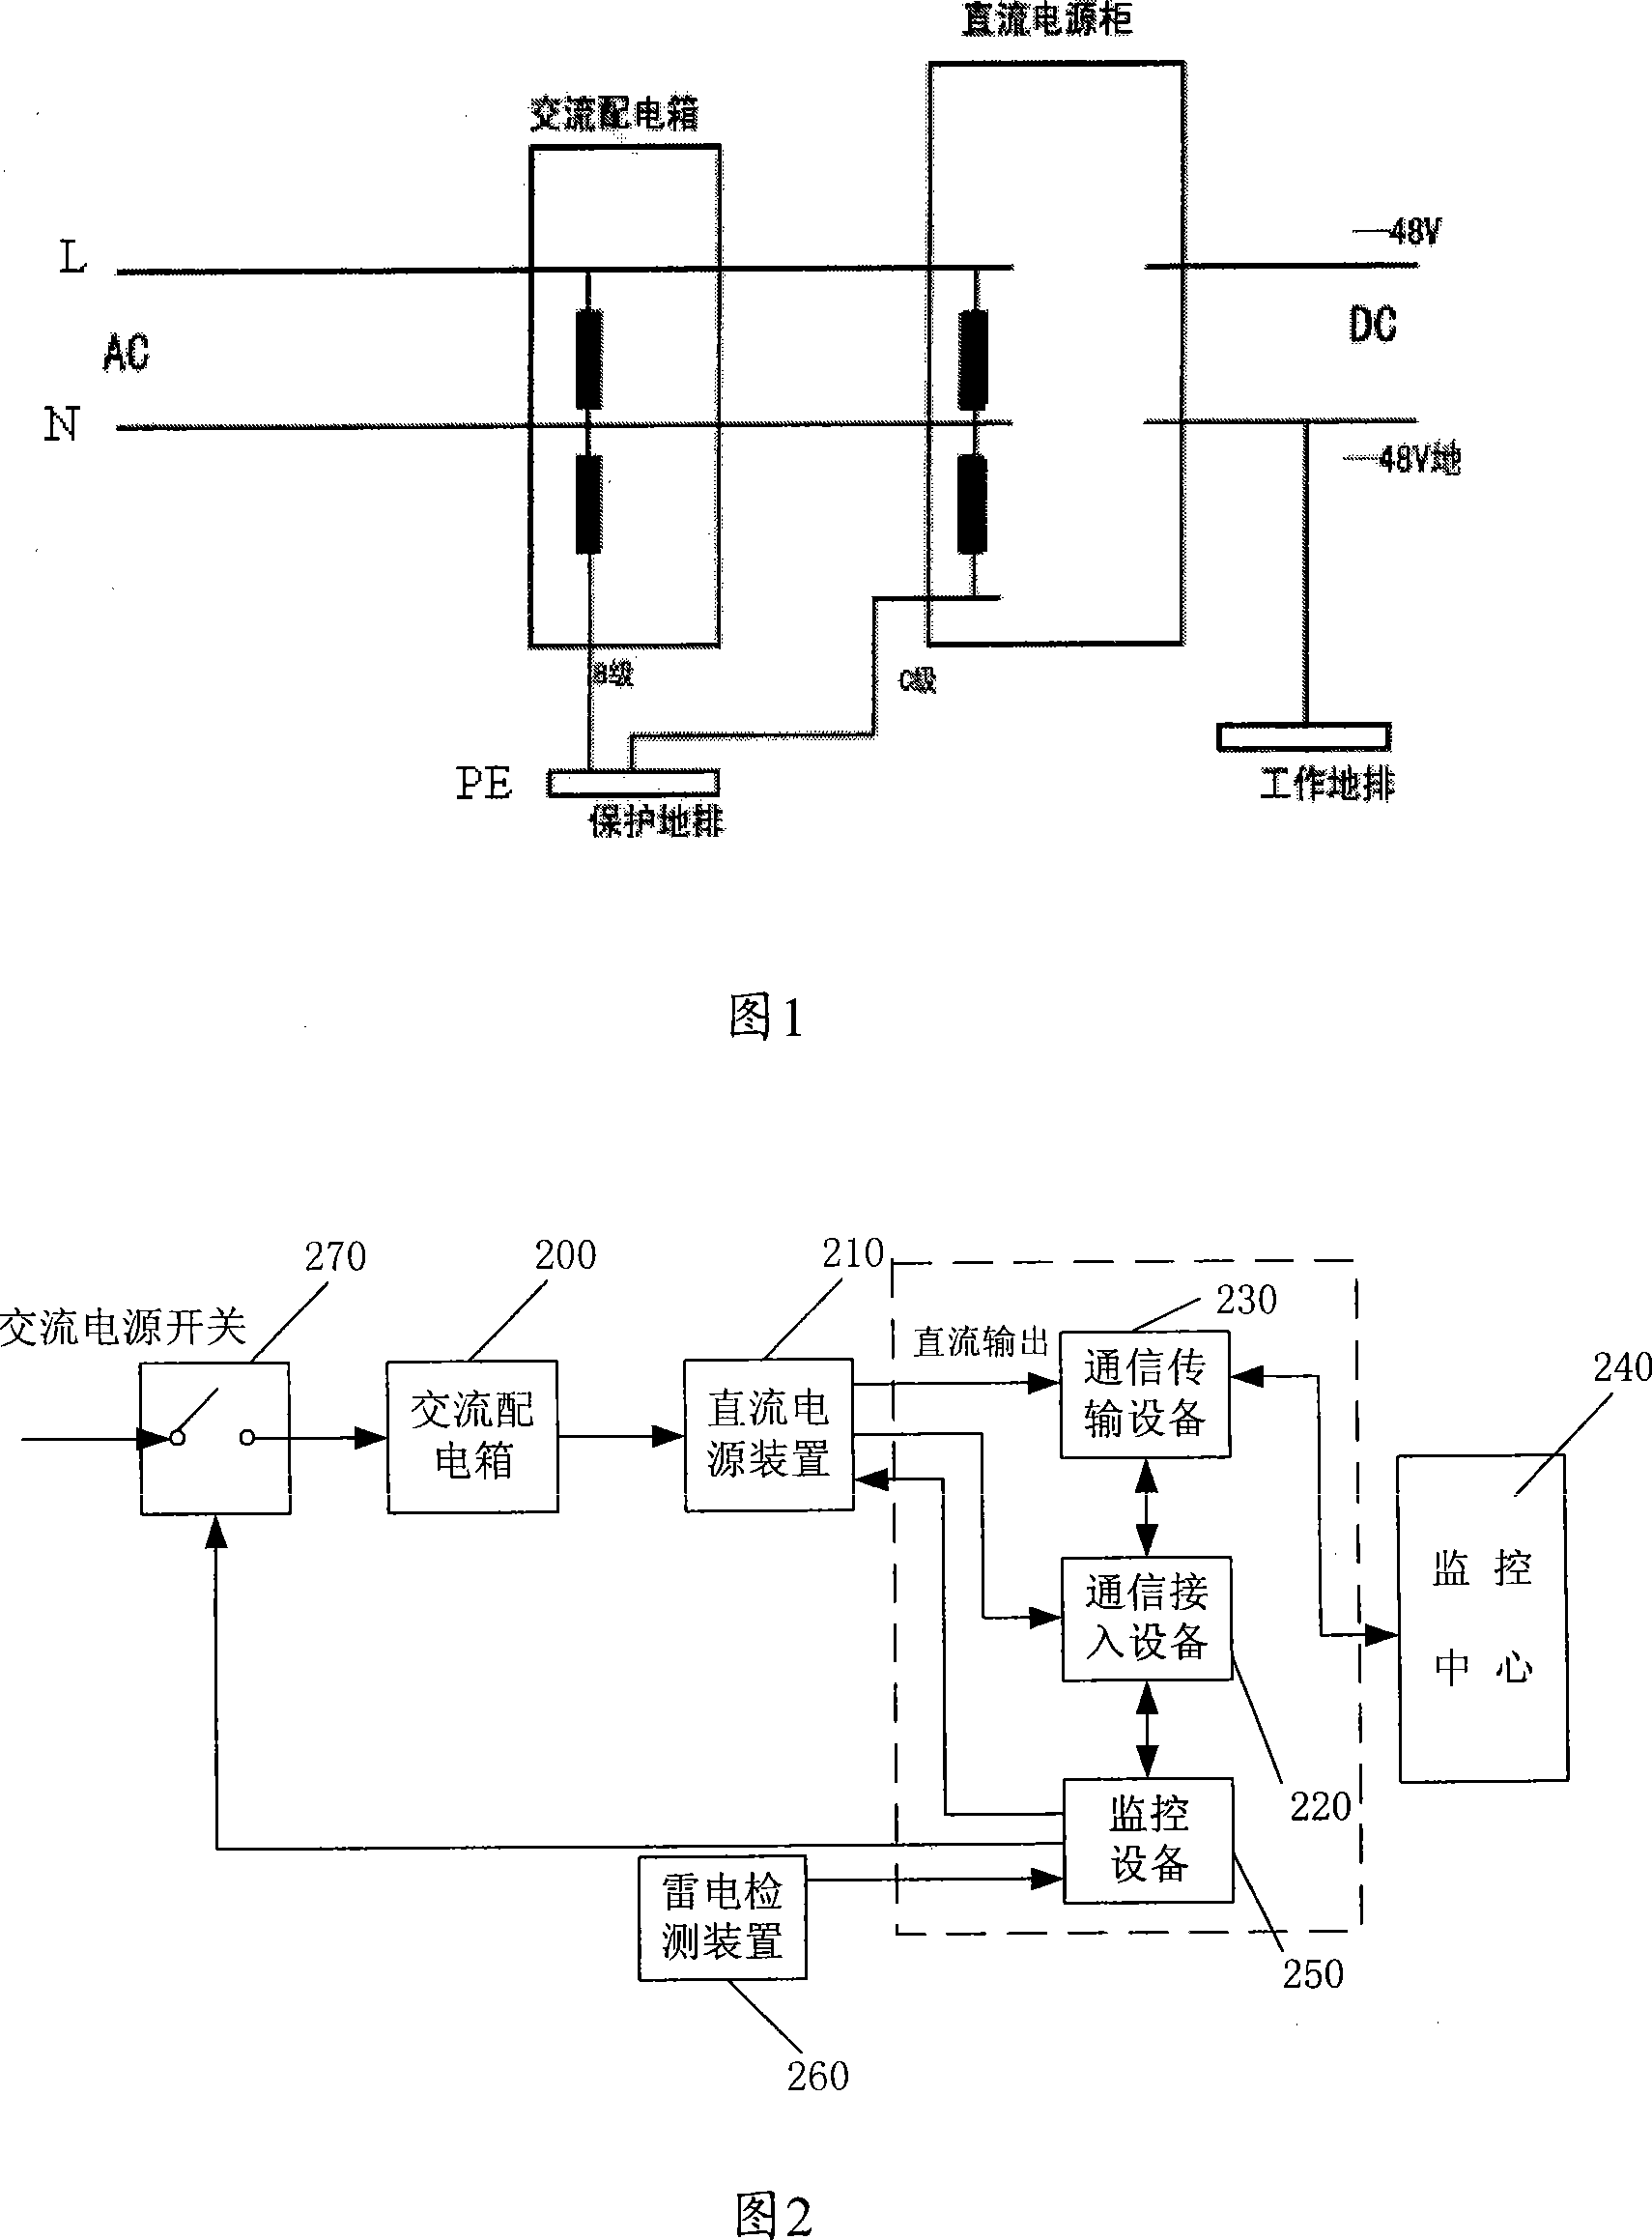 A lighting over-voltage protection method and system for remote computer room AC power input